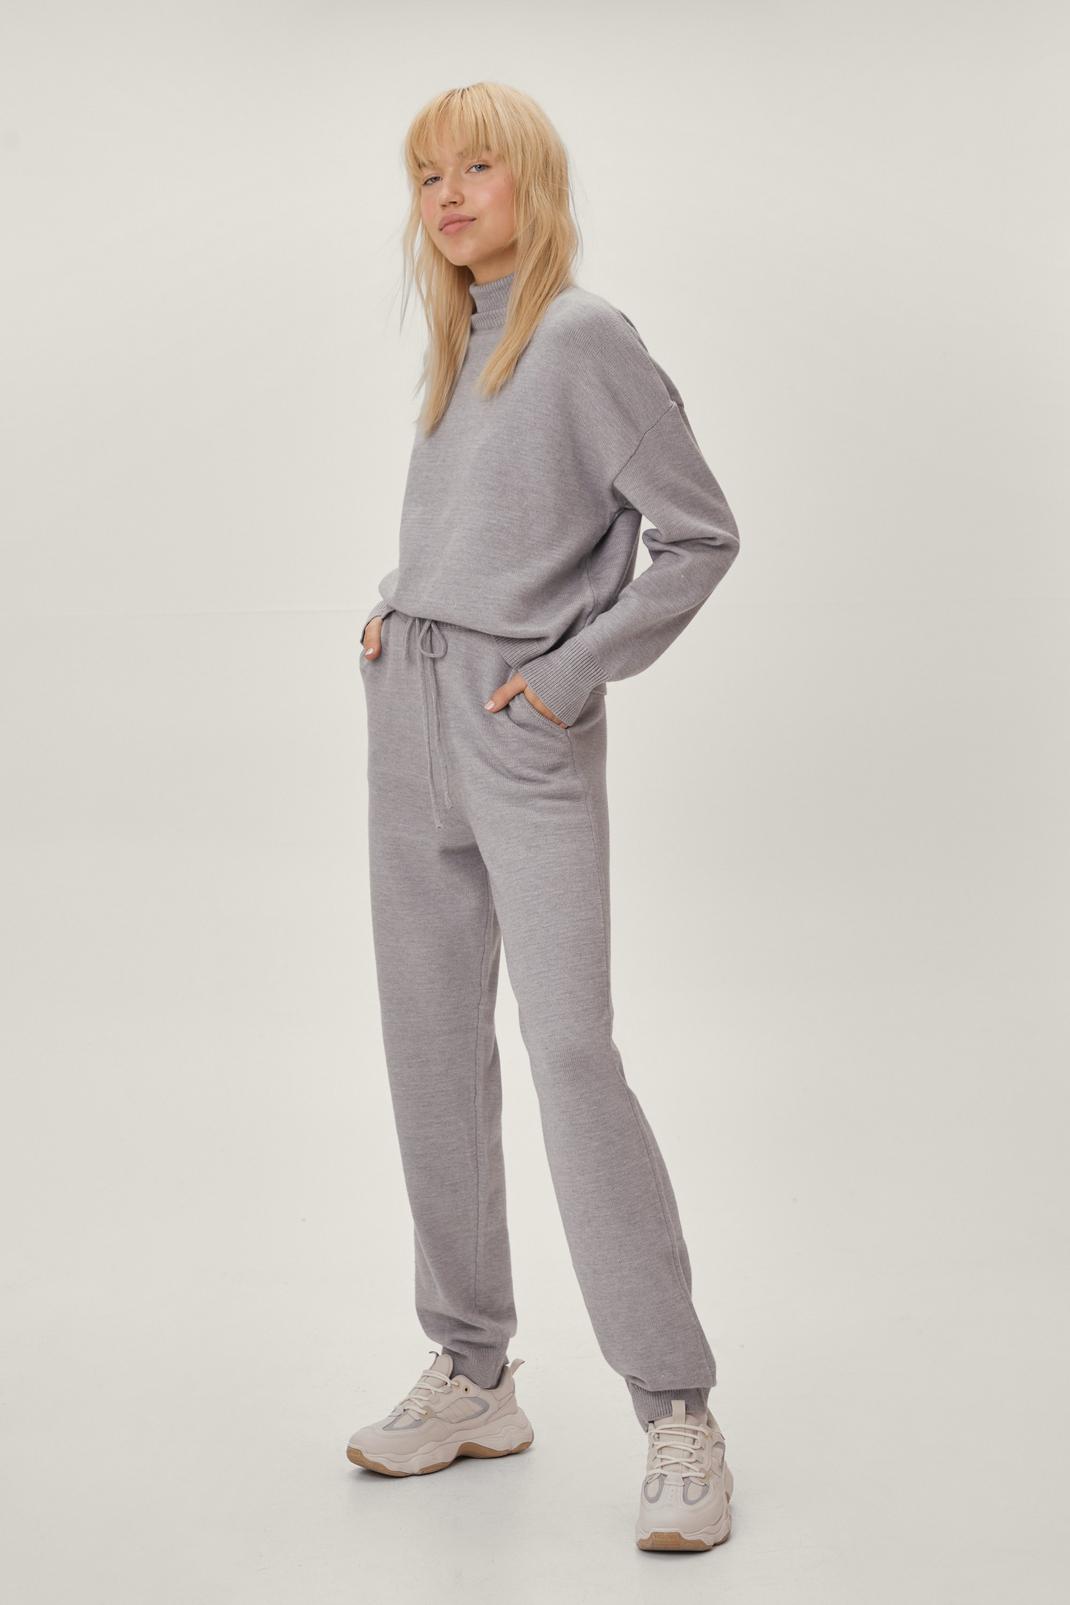 https://media.nastygal.com/i/nastygal/agg14460_grey_xl/female-grey-knitted-sweater-and-pants-two-piece-set/?w=1070&qlt=default&fmt.jp2.qlt=70&fmt=auto&sm=fit